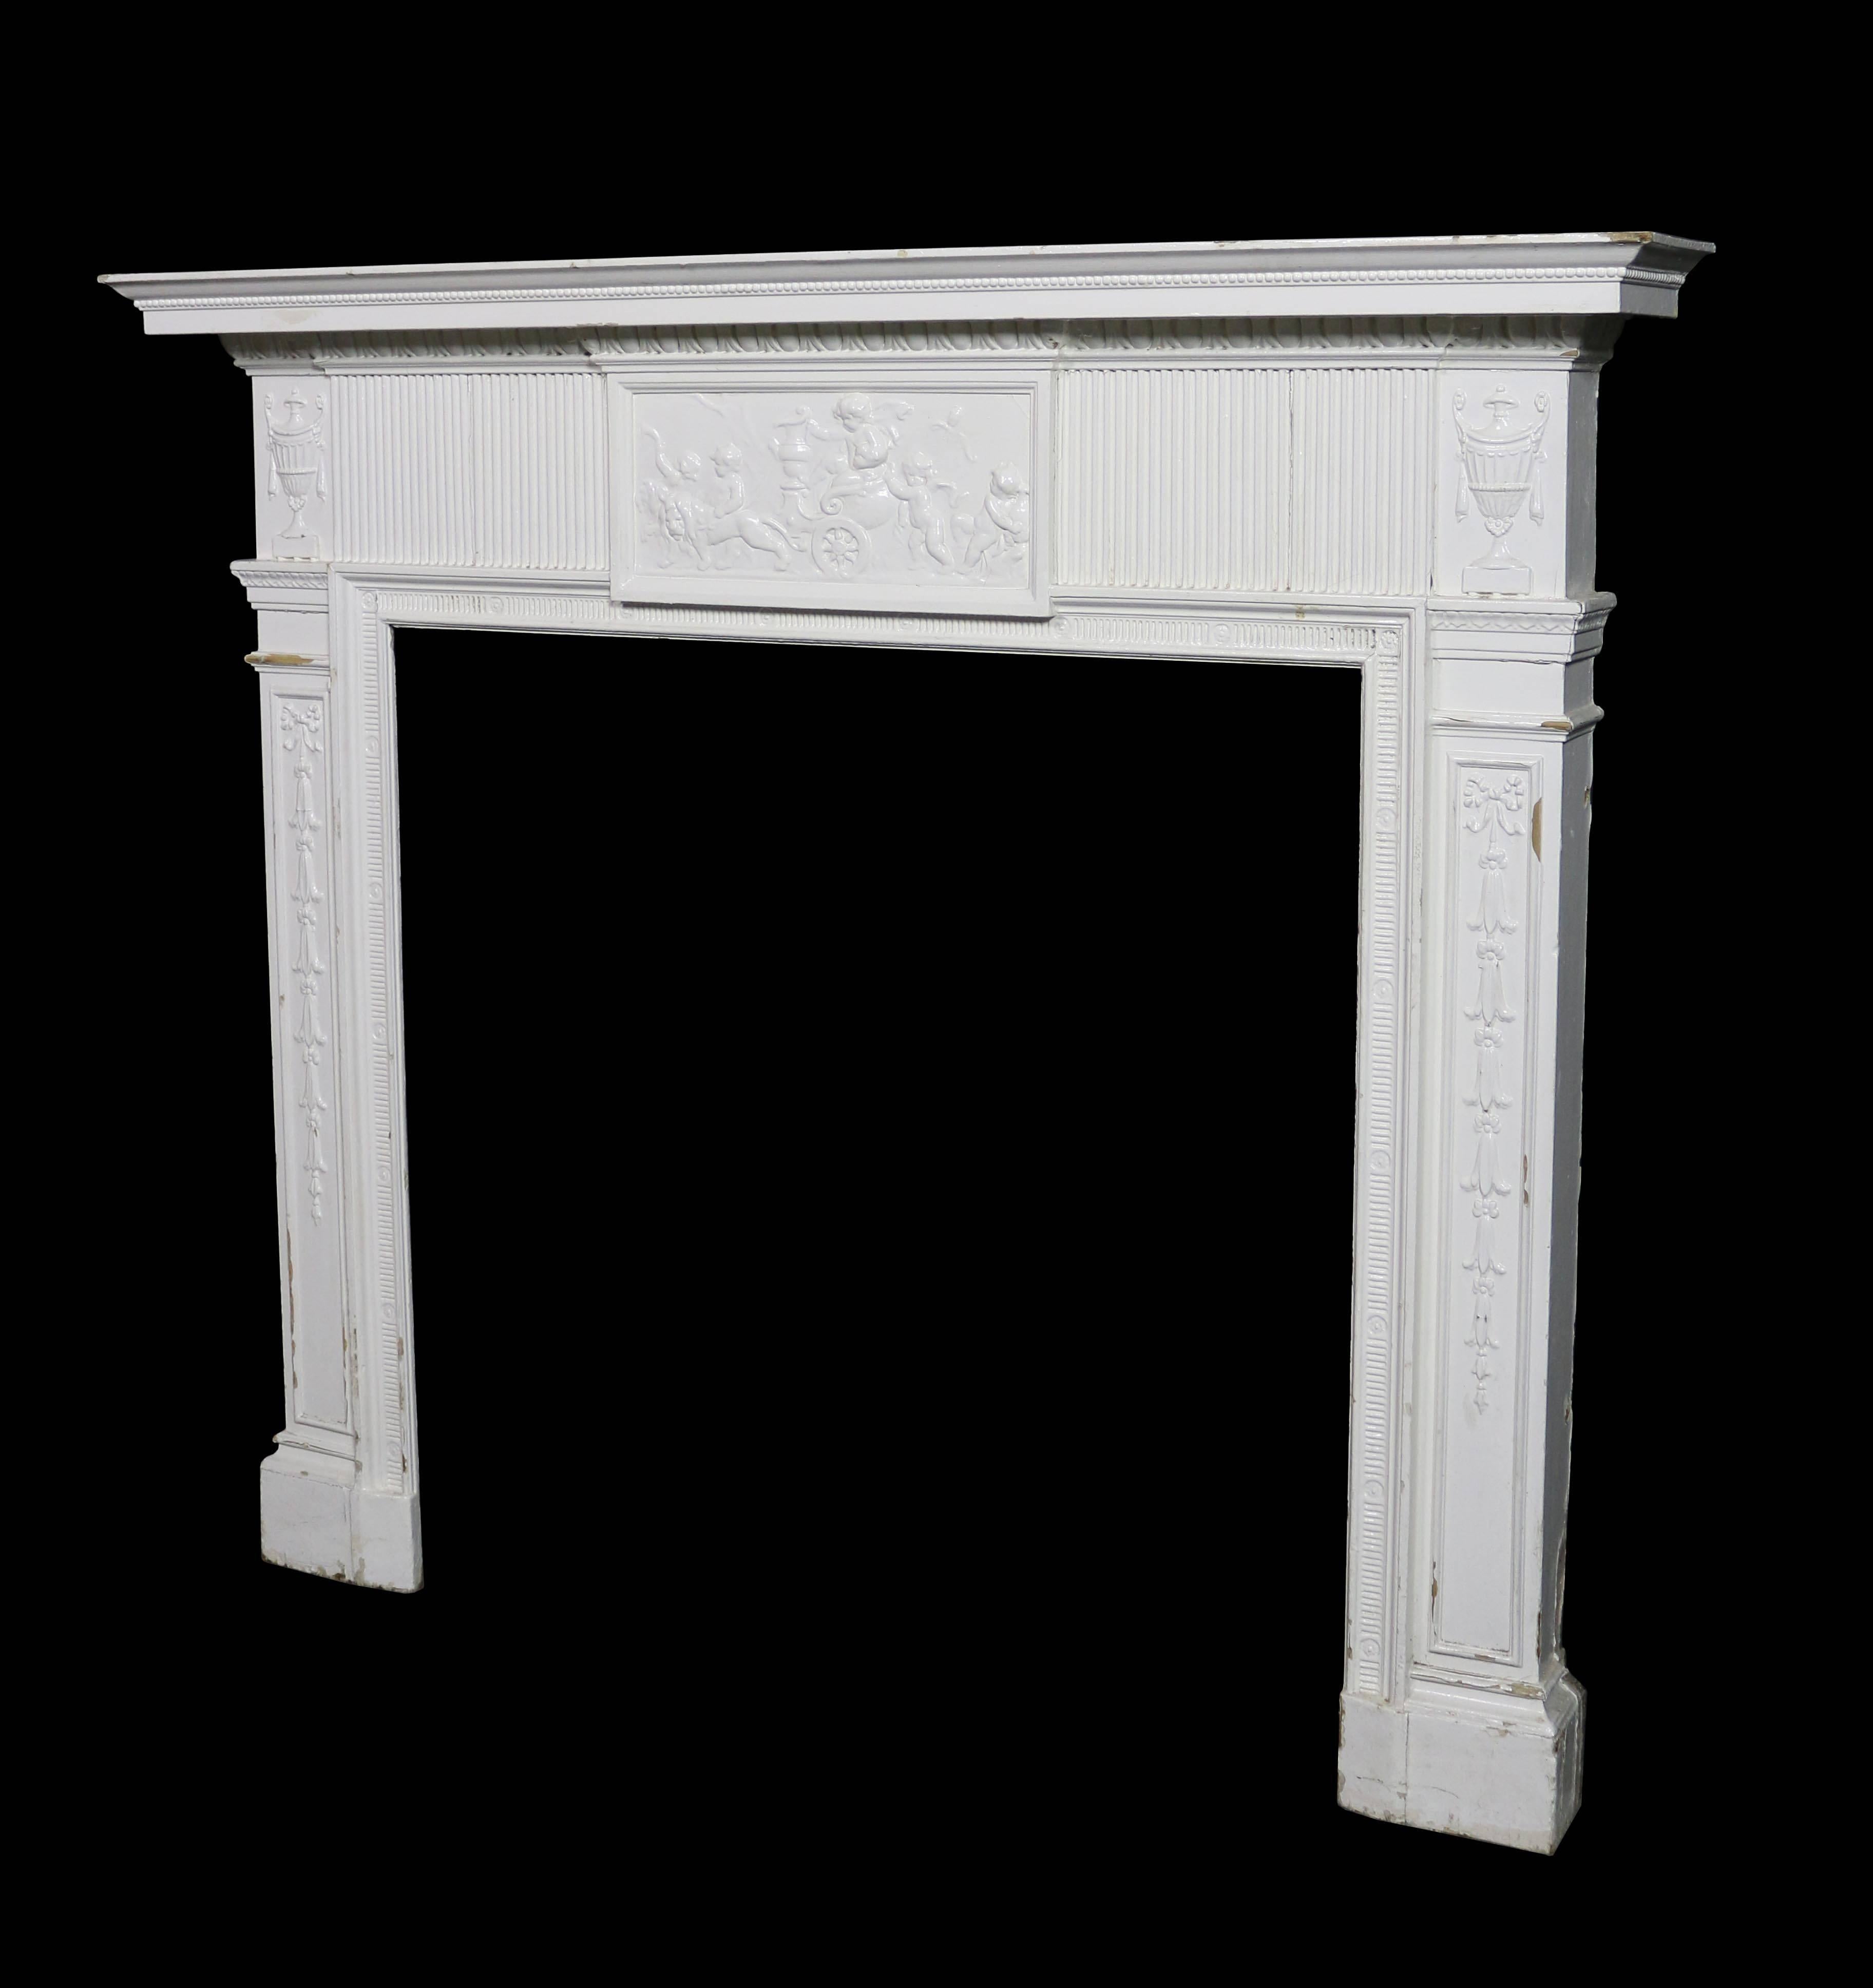 Painted 19th century pine and composition fire surround. Measures: Opening height 106 cm
opening width 106 cm.